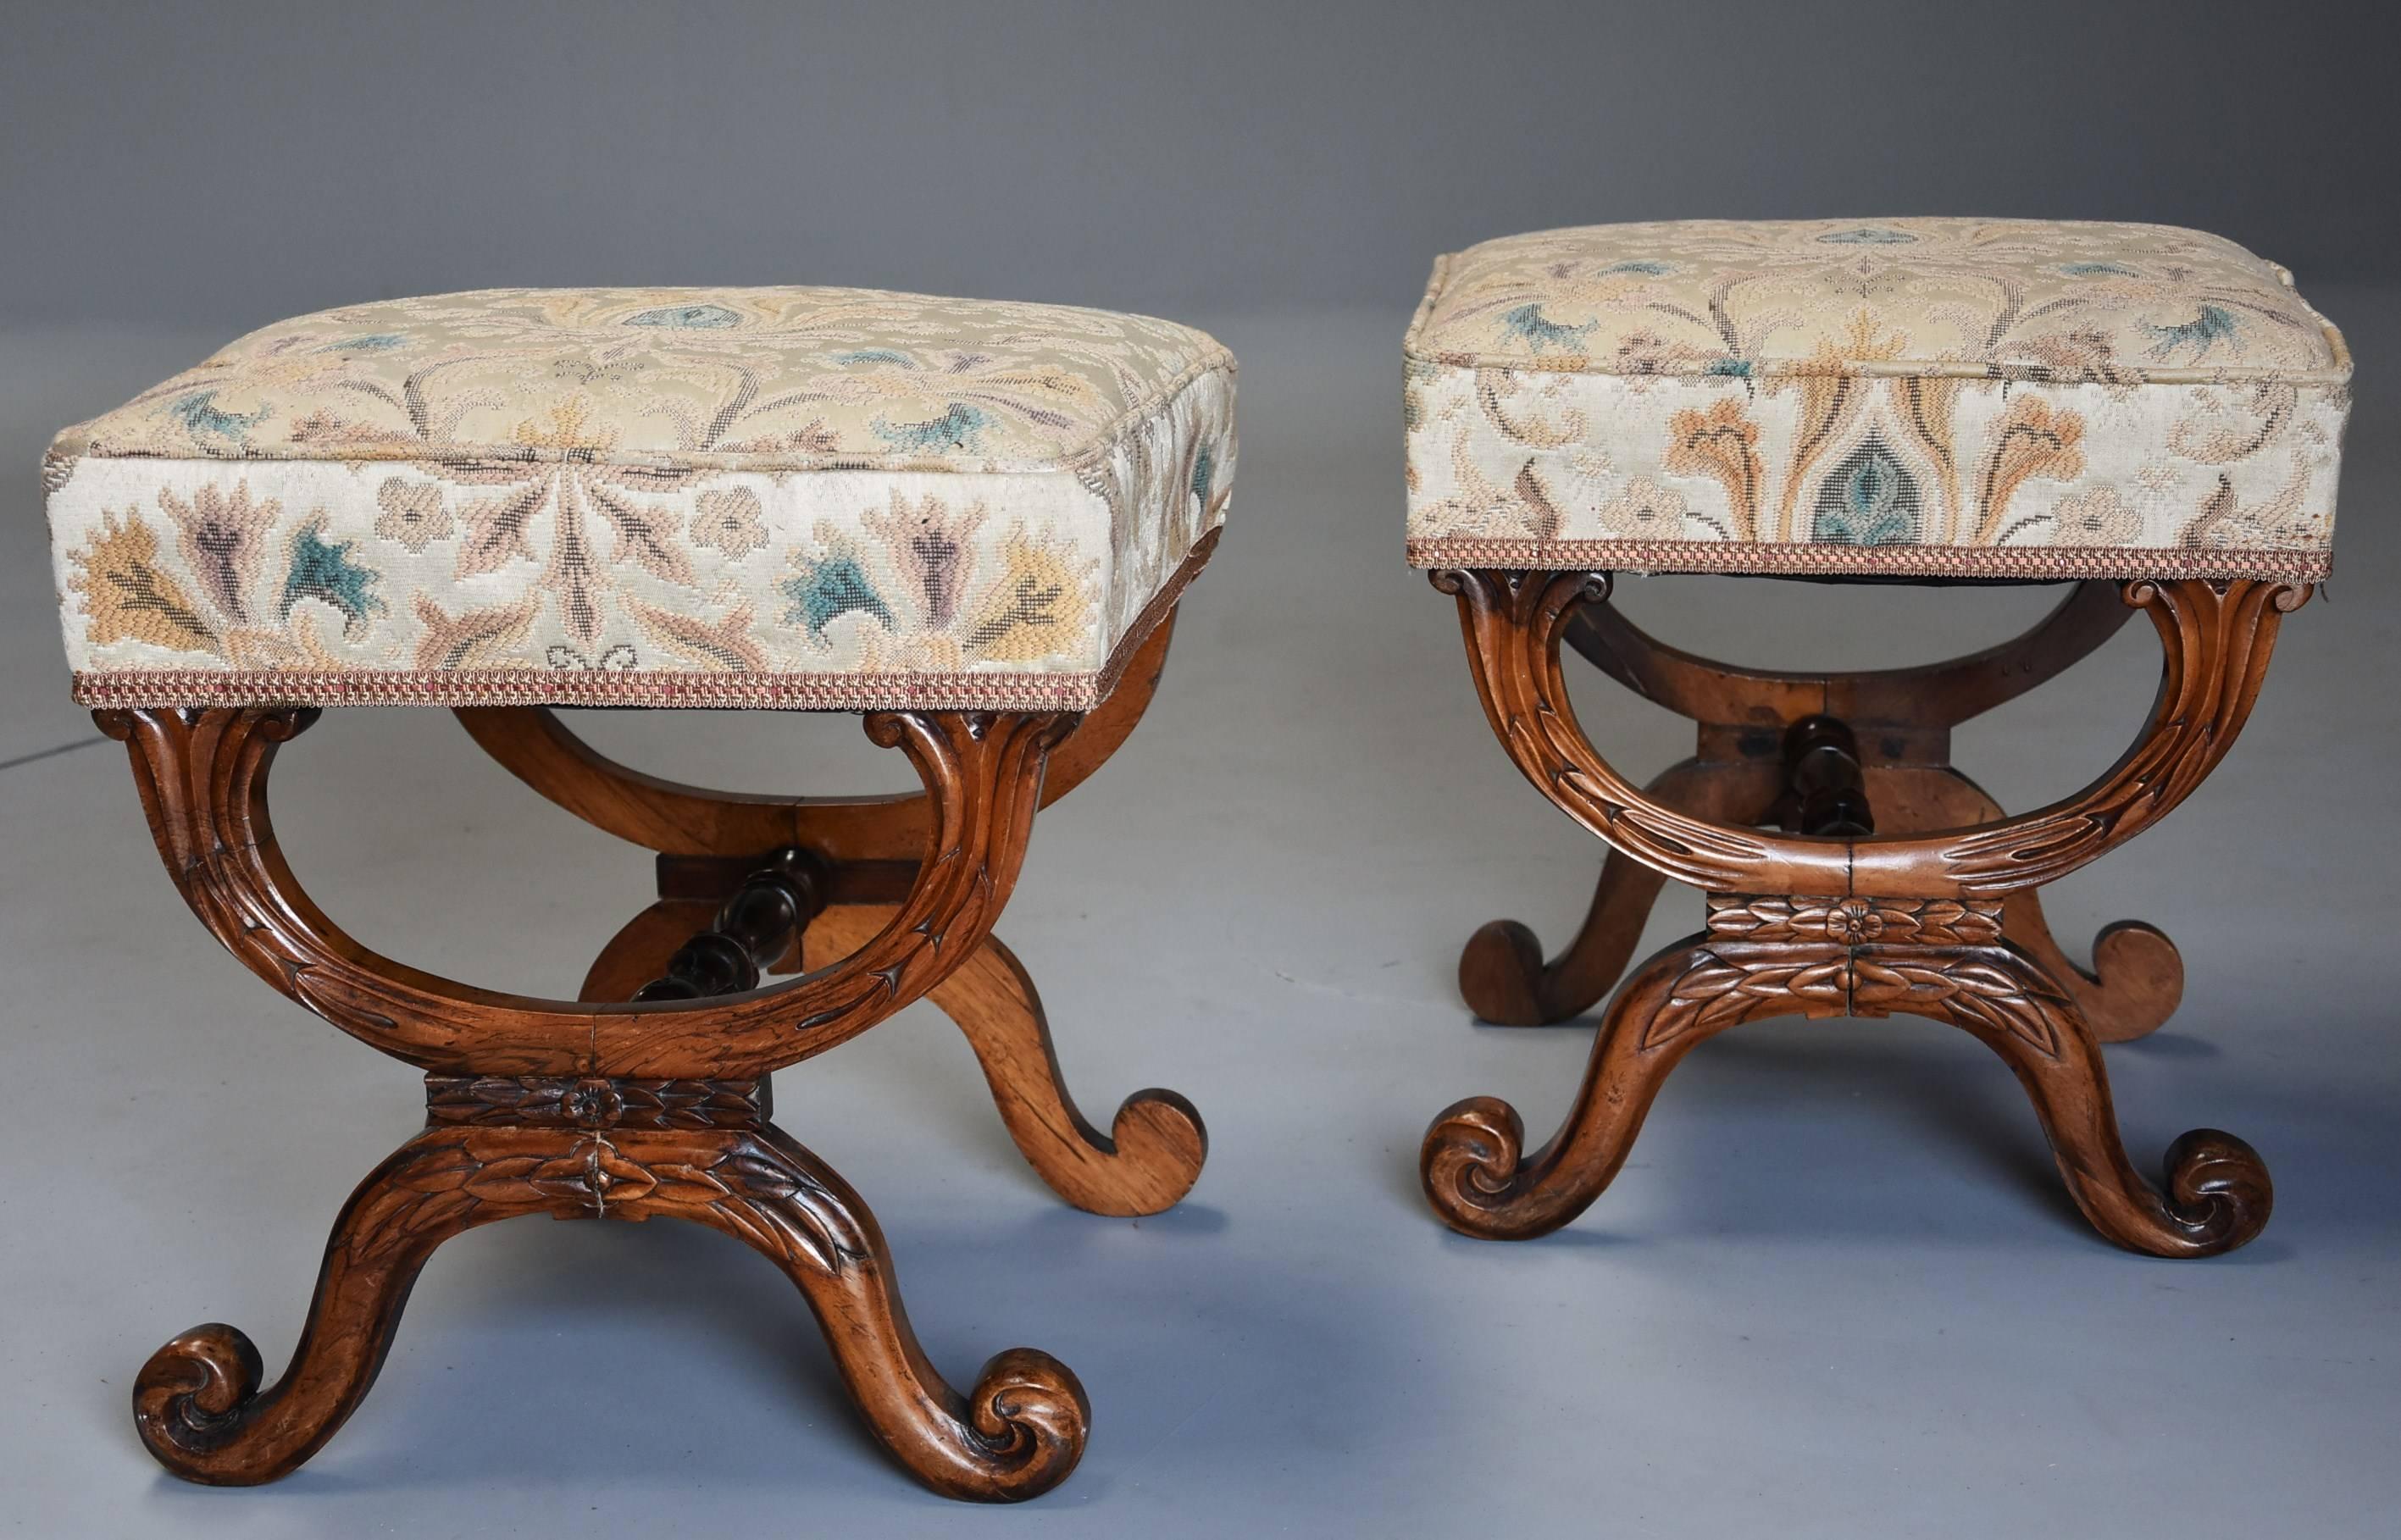 A pair of 19th century William IV (circa 1840) rosewood X-frame upholstered stools.

This pair of stools consist of upholstered seats finished in a tapestry style fabric with piping and braid, the upholstery in very good condition.

These lead